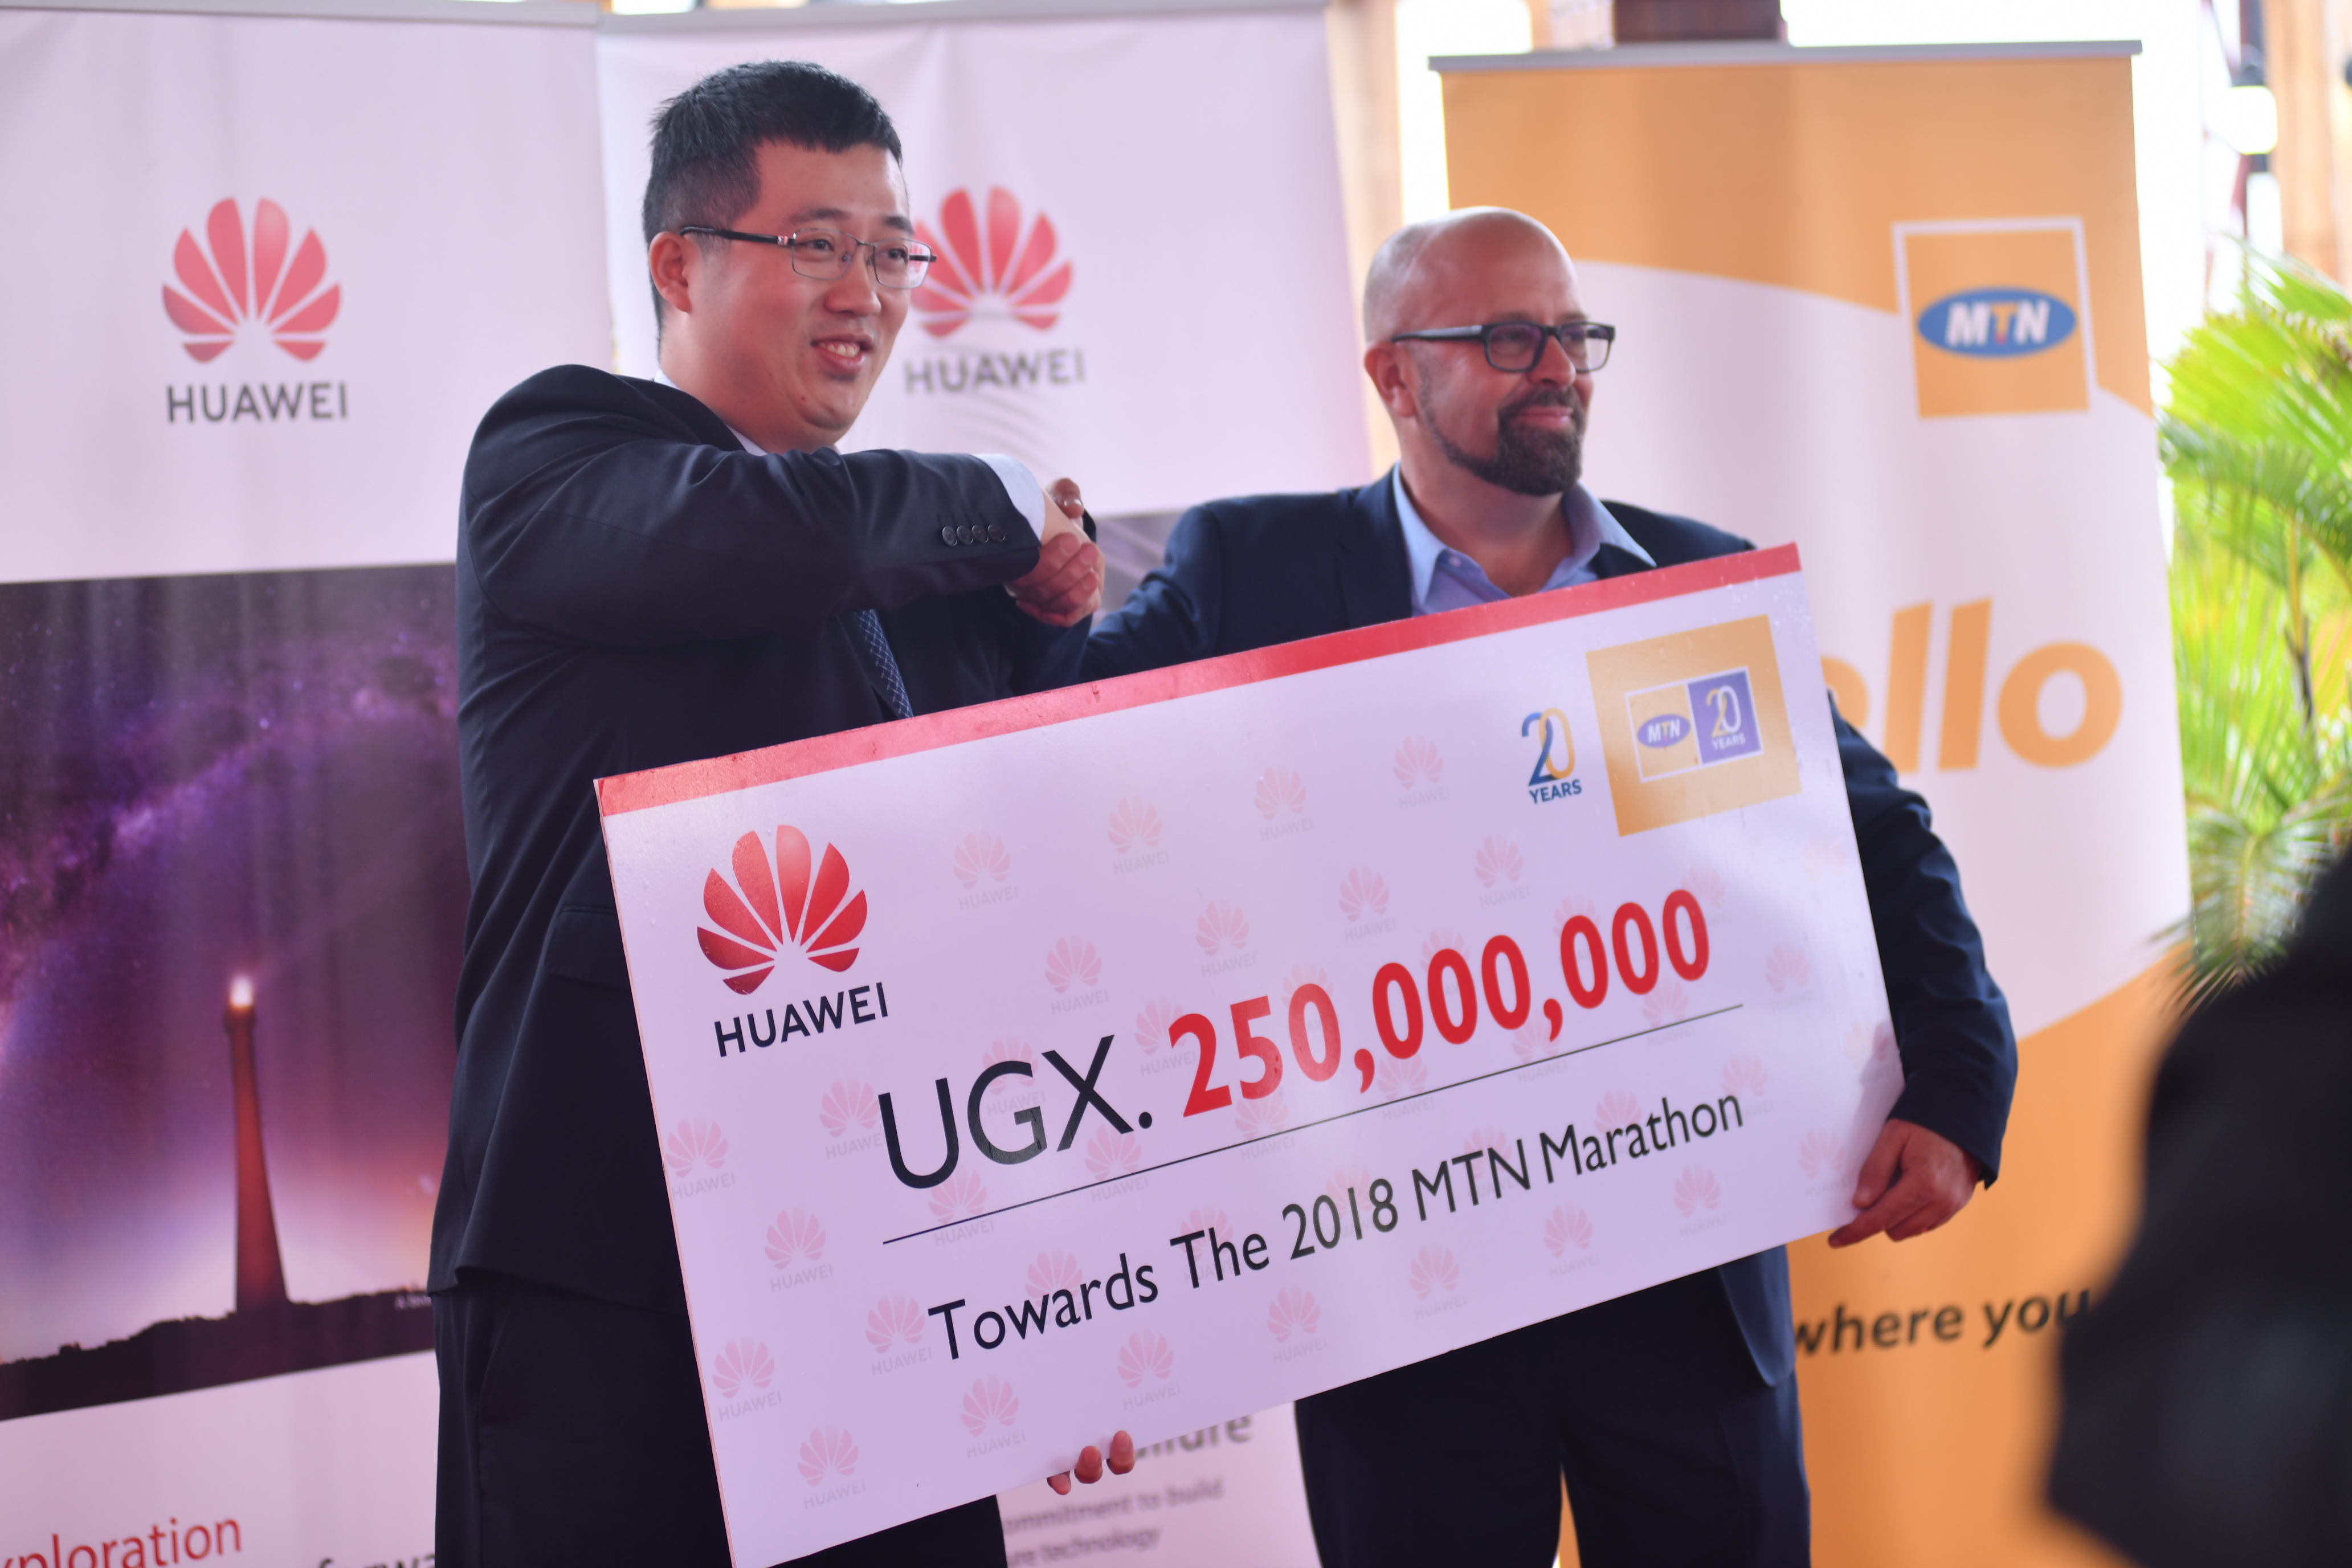 Huawei Uganda Managing Director Mr. Liujiawei hand over a dummy cheque board of Huawei's Contribution to the MTN Marathon of 250,000,000 Ugx to MTN Uganda Chief Marketing Officer Mr. Olivier Pentout.